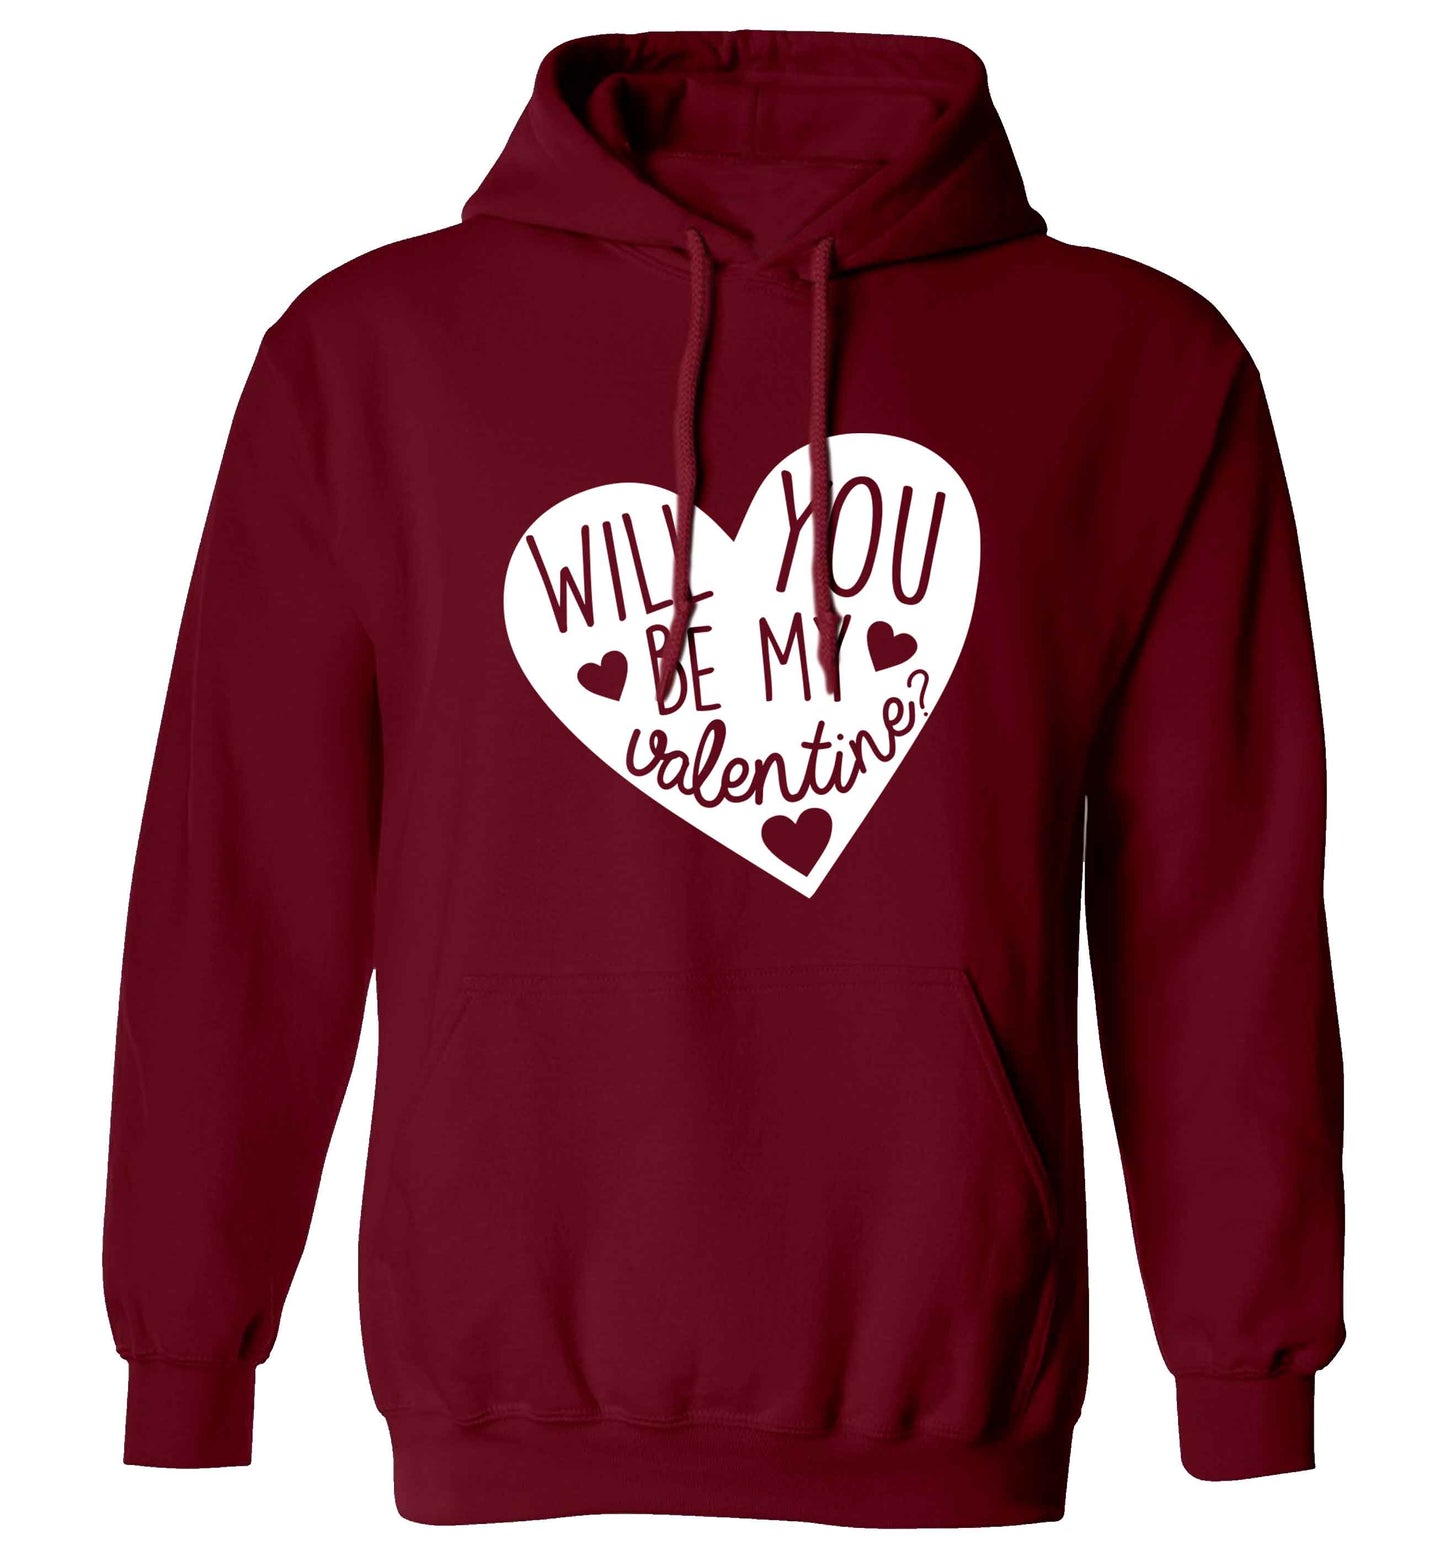 Will you be my valentine? adults unisex maroon hoodie 2XL